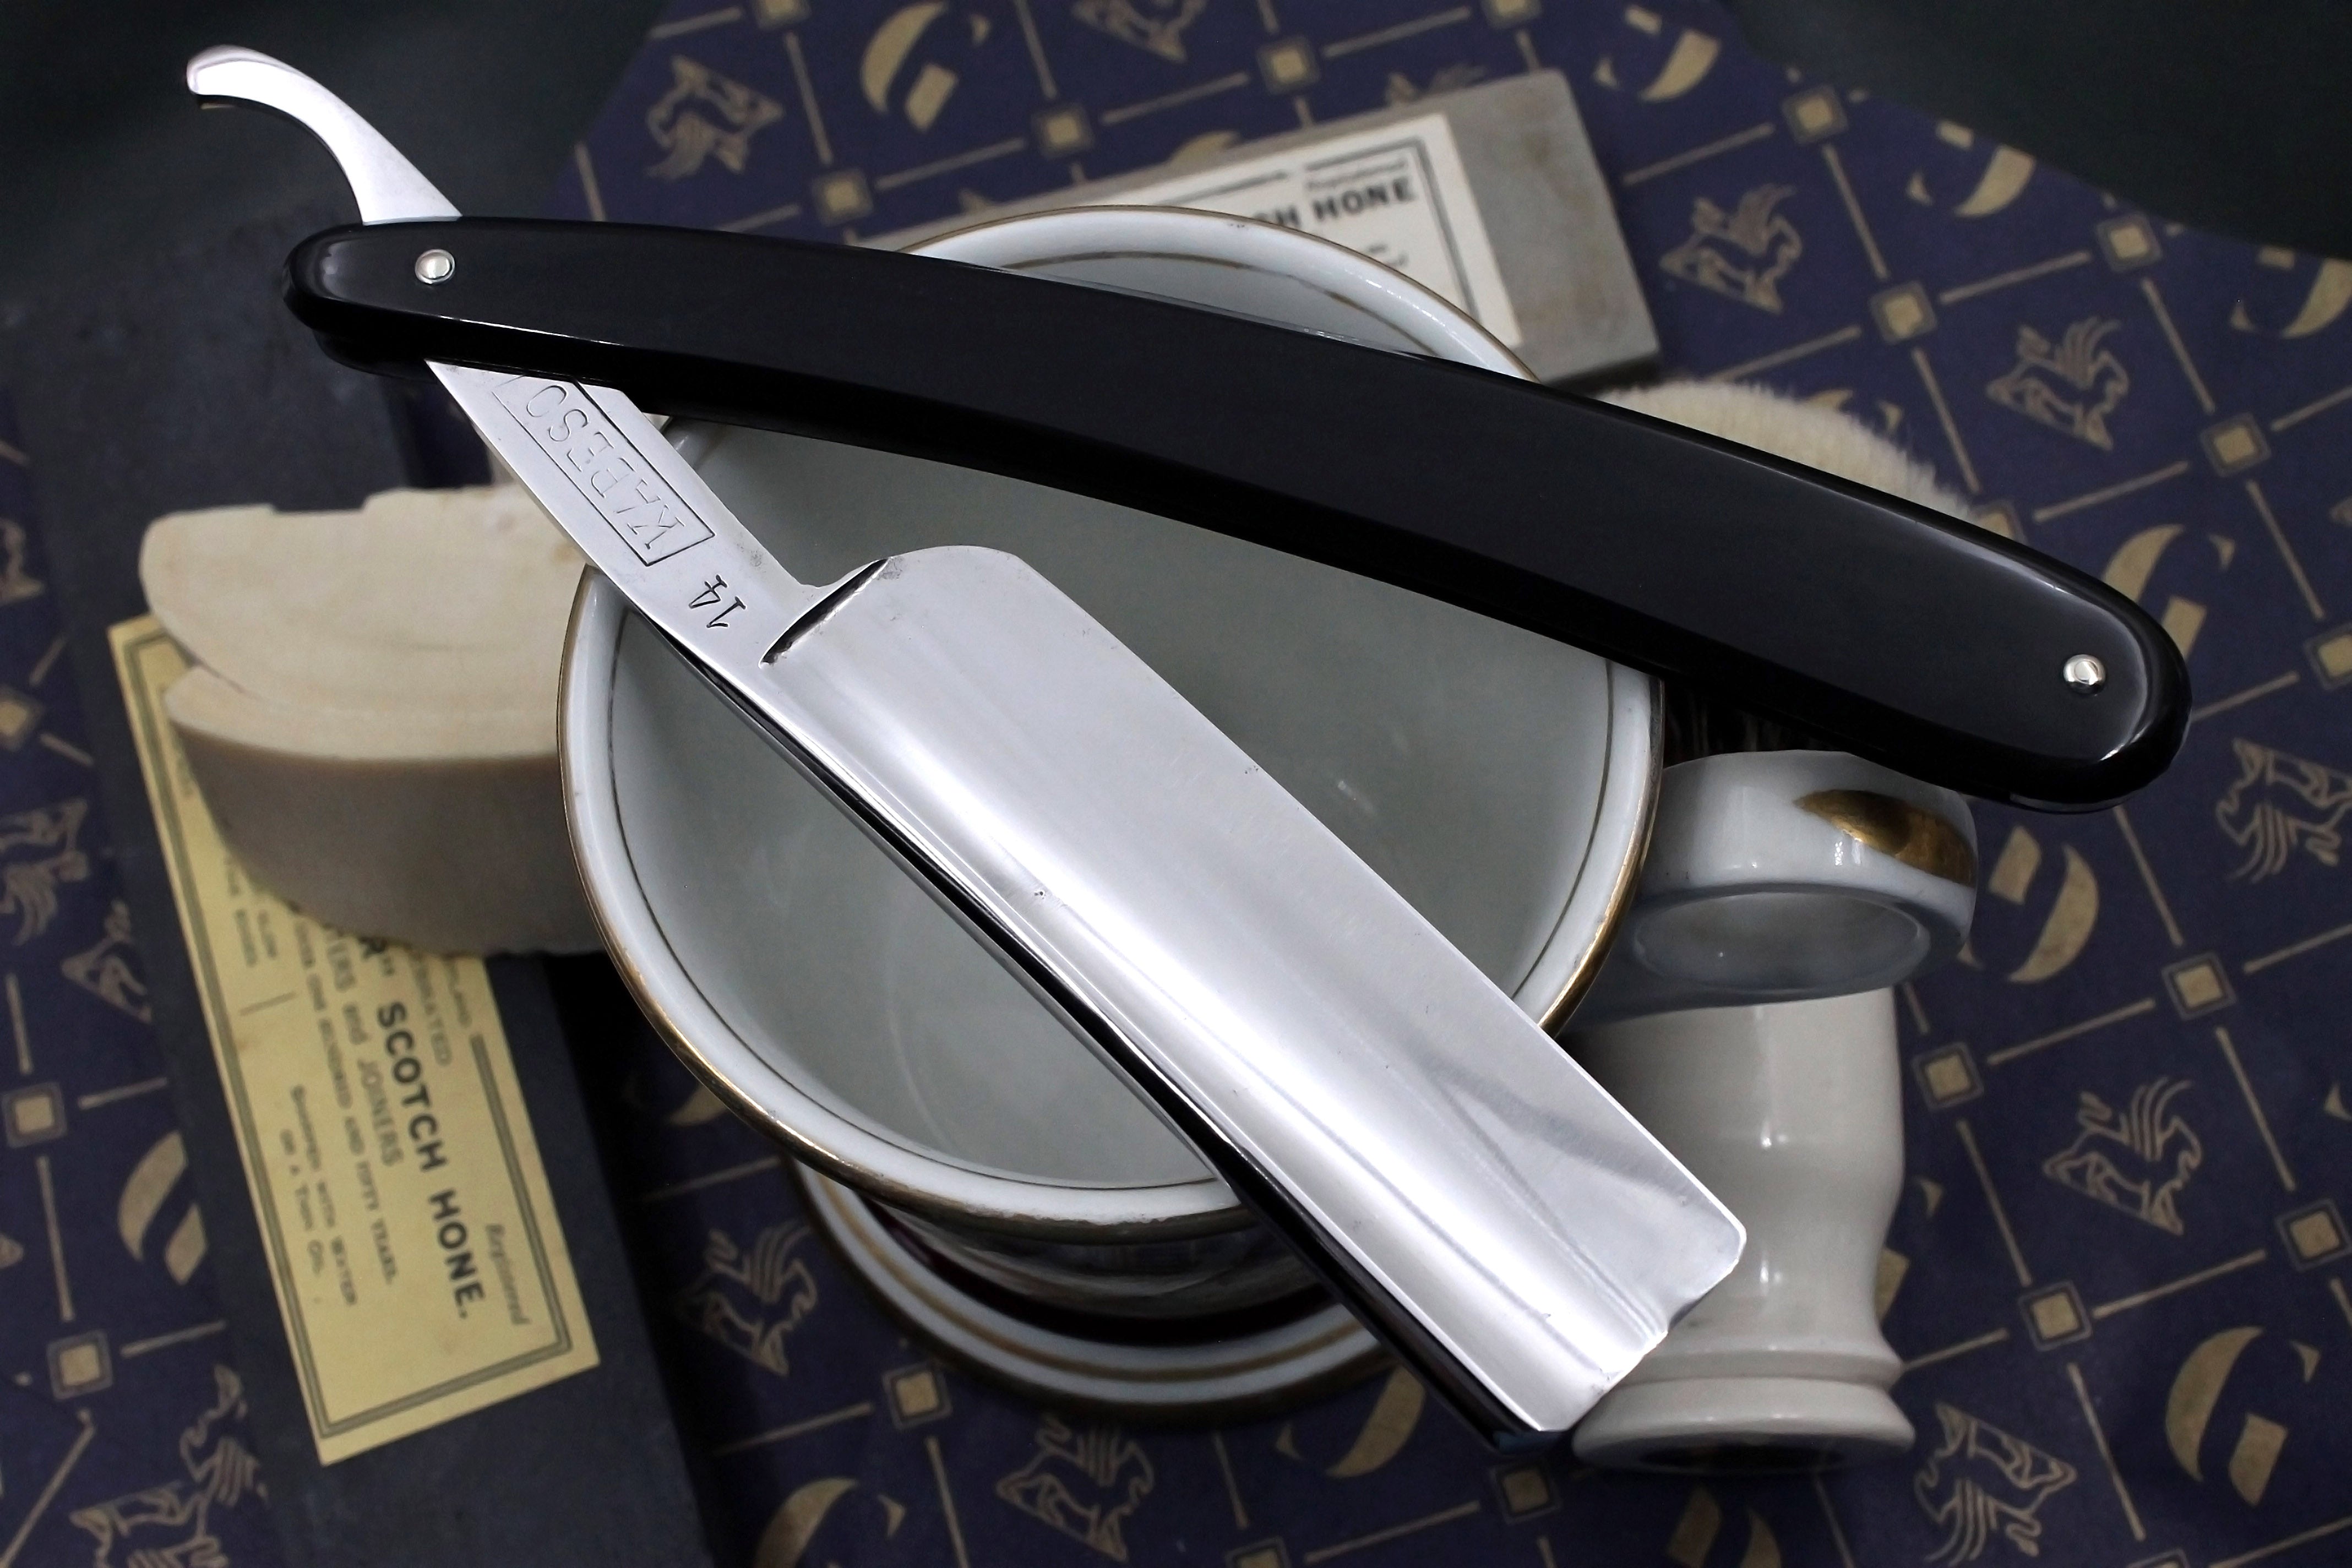 Kabeso No. 14 - 15/16 Full Hollow Blade - Excellent Restored Vintage Solingen Straight Razor - Shave Ready